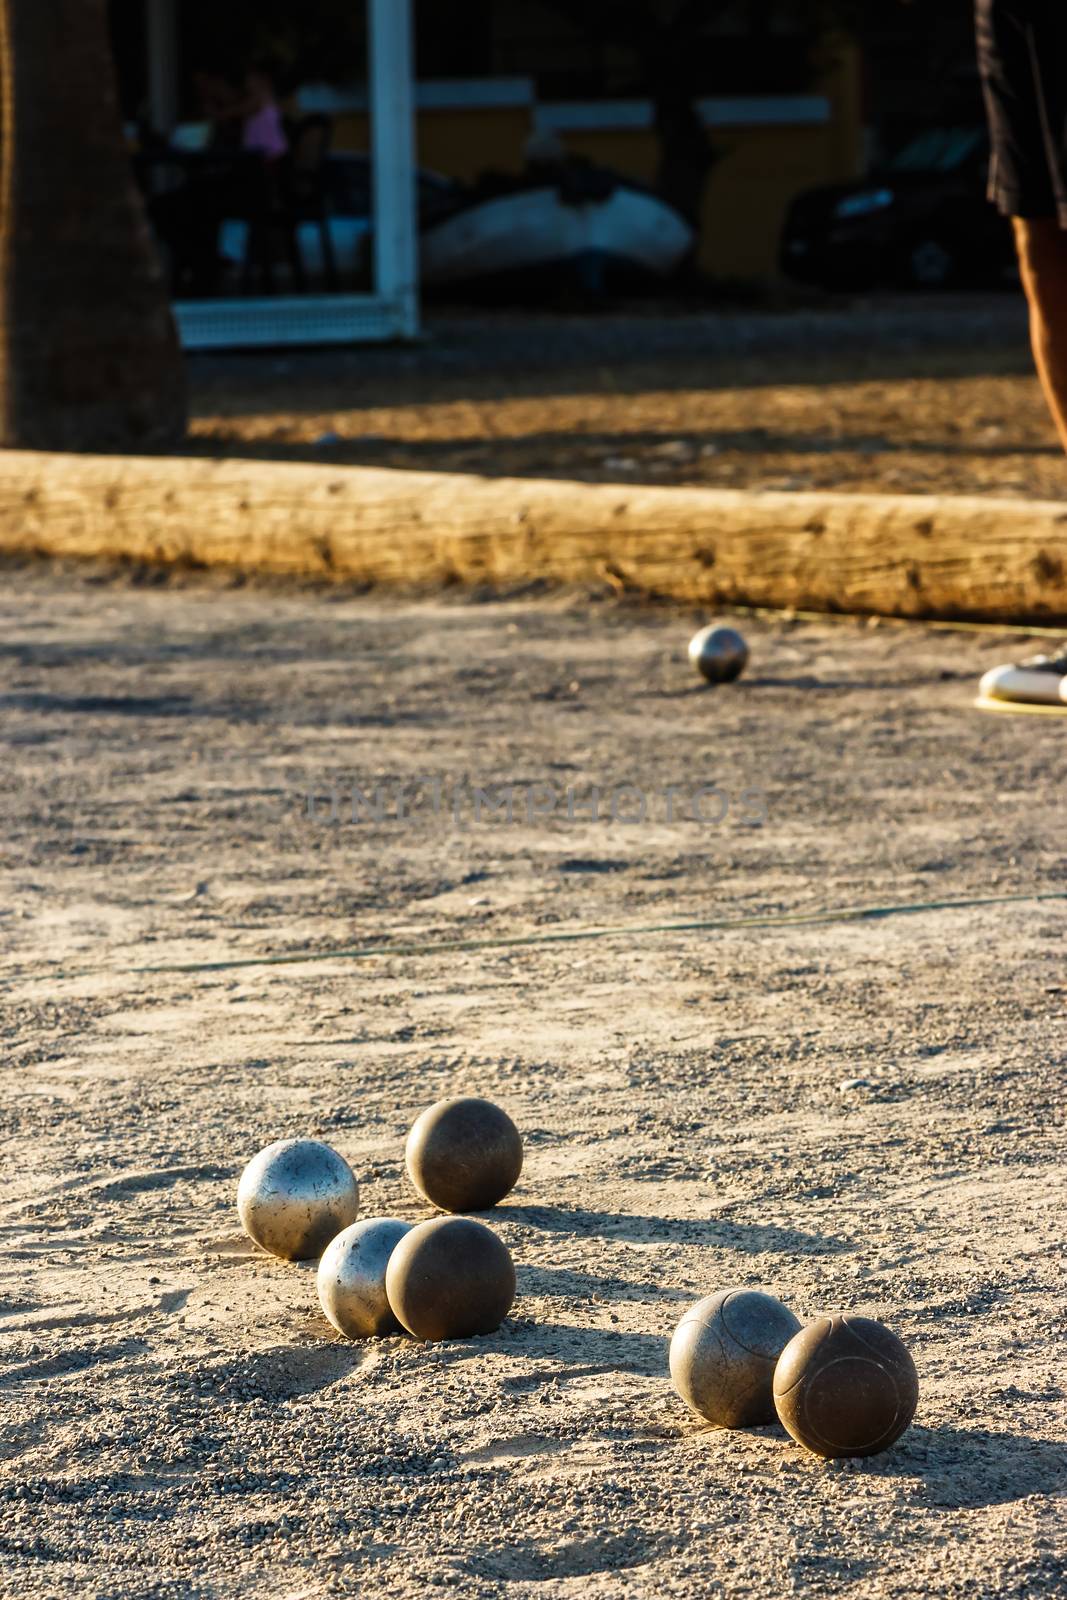 Game of petanque on the ground. Verical image.